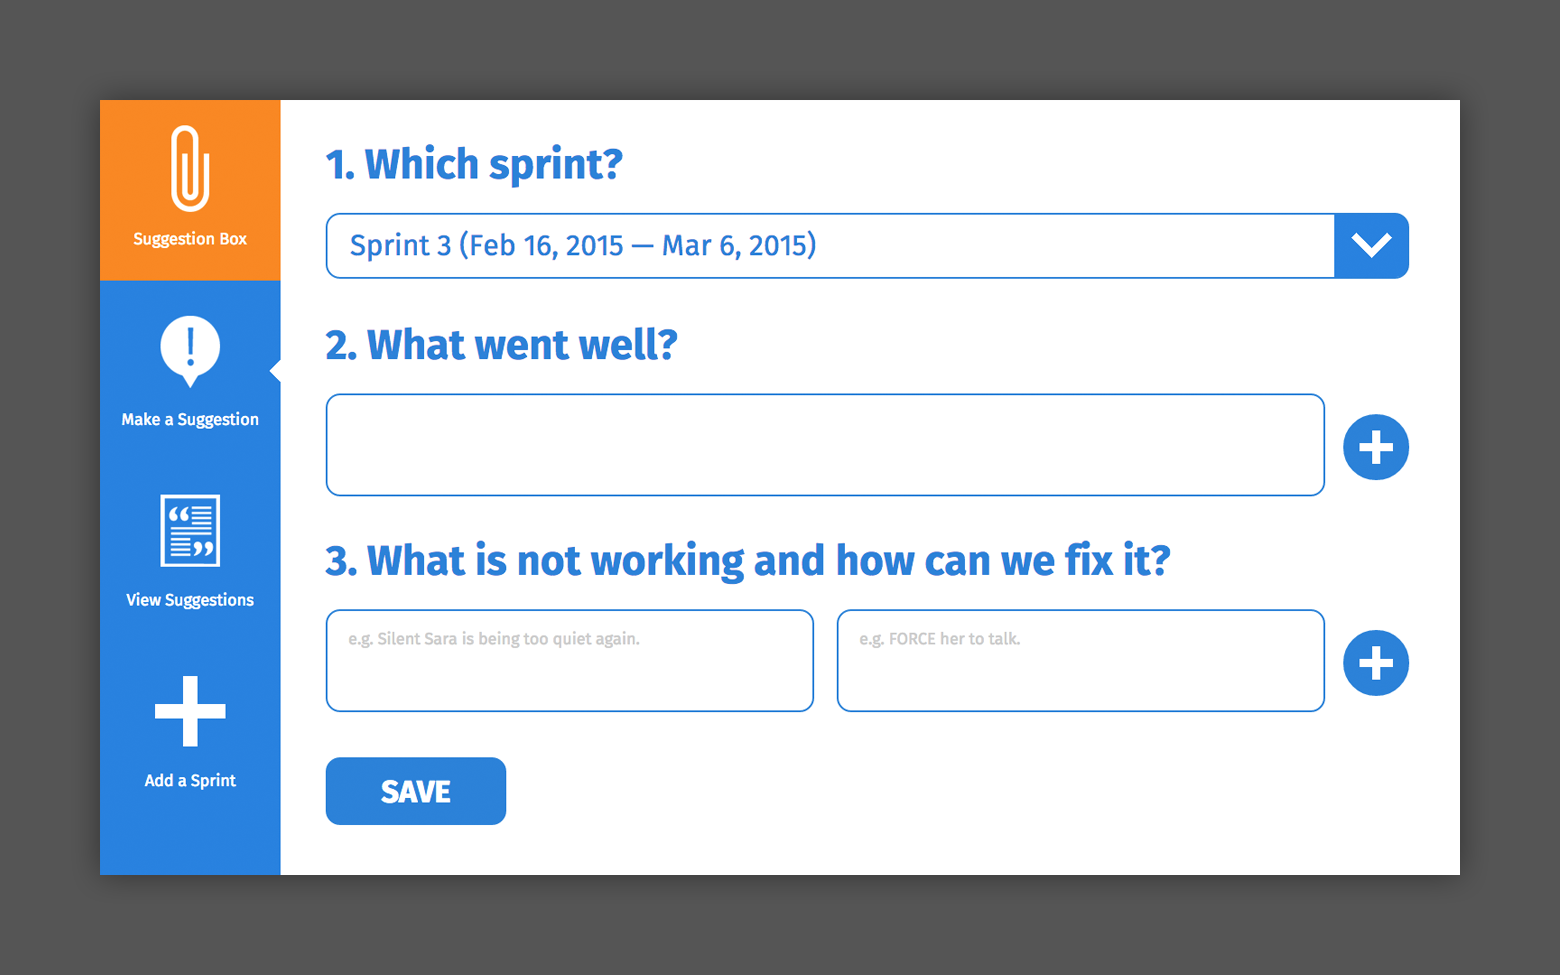 An app used to accept suggestions on how a team can make improvements. Contains a dropdown box where the user can select sprint, an input for what went well and an input for what is not working and how it can be fixed